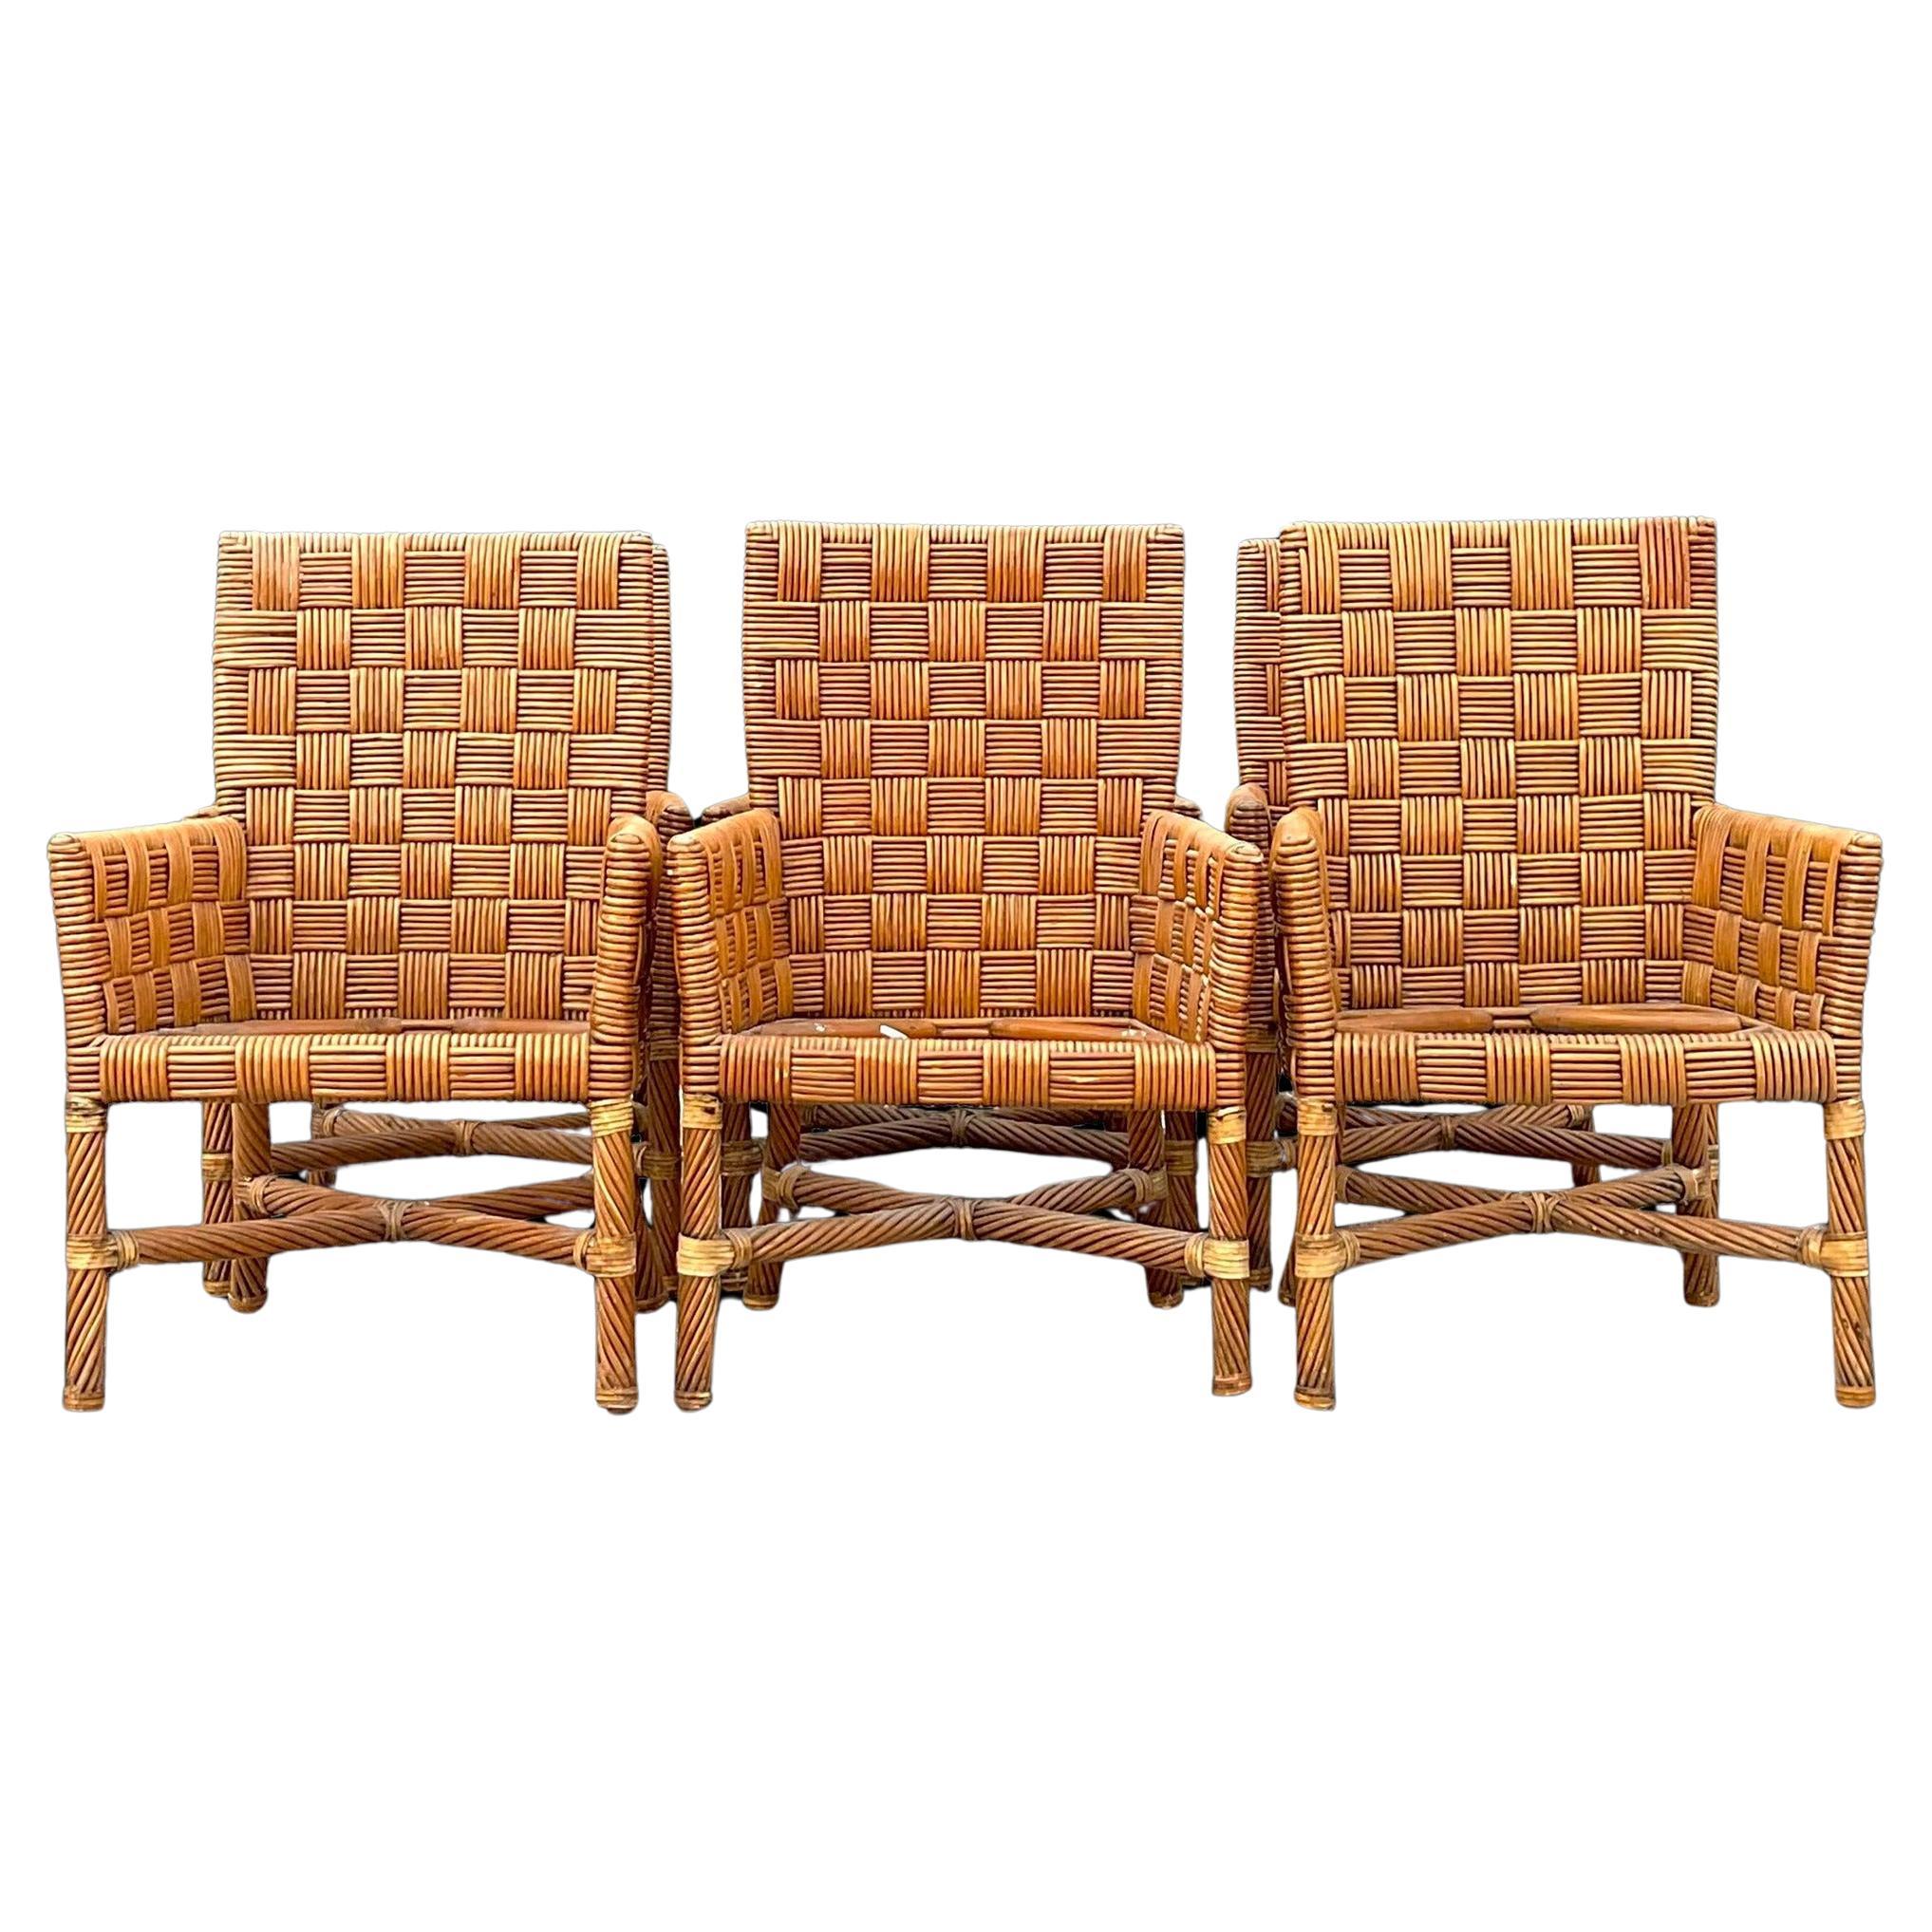 Vintage Basket Weave Rattan Dining Chairs - Set of 6 For Sale